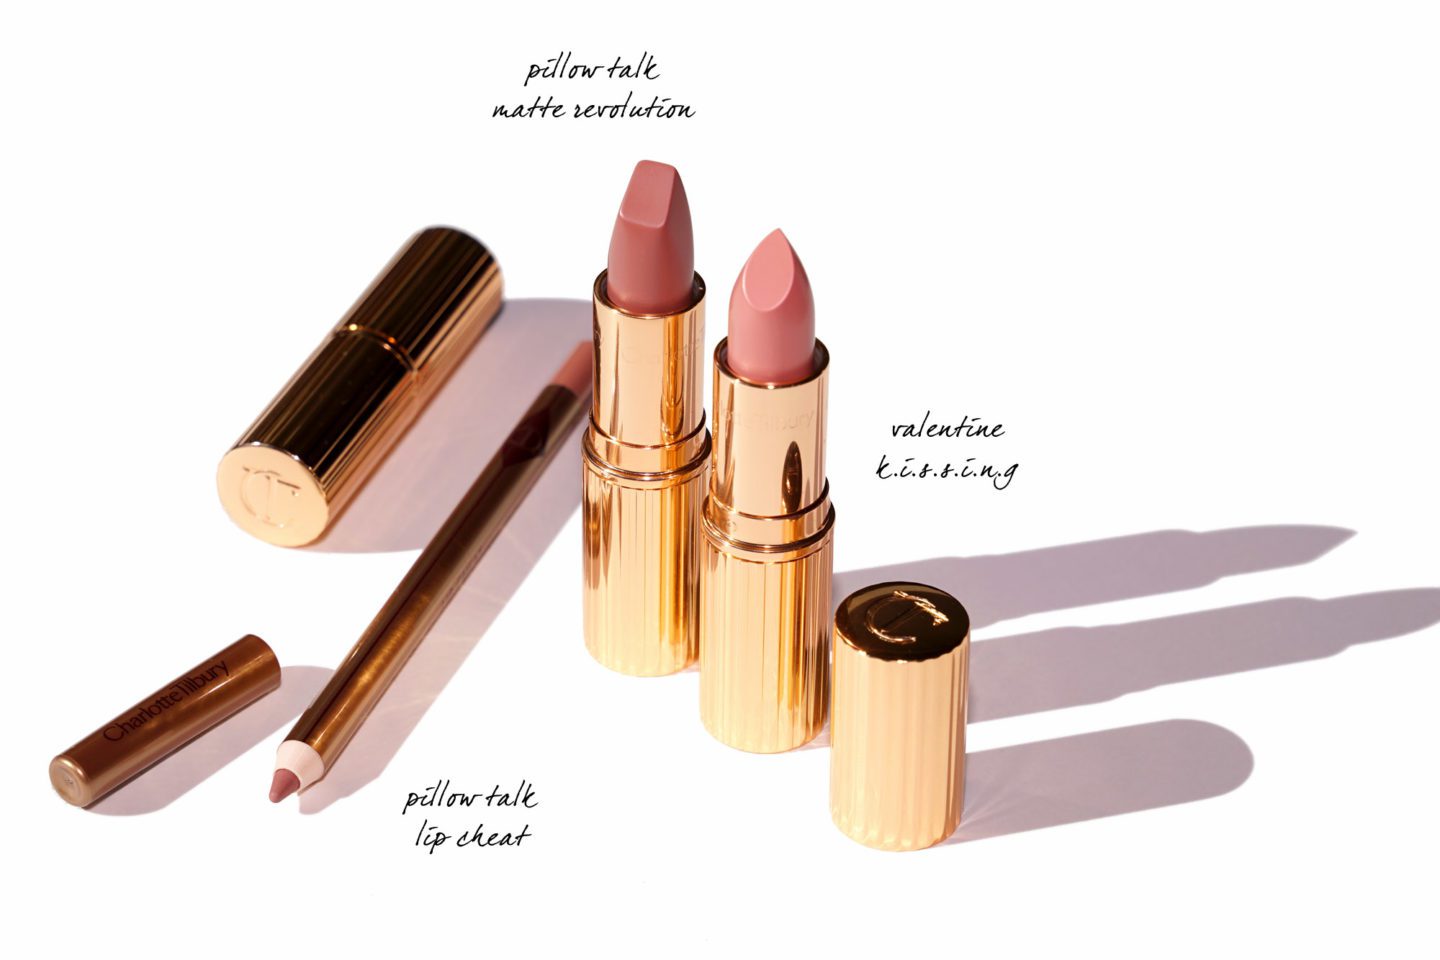 Charlotte Tilbury Pillow Talk Matte Revolution and Valentine KISSING Lipstick Review | The Beauty Look Book